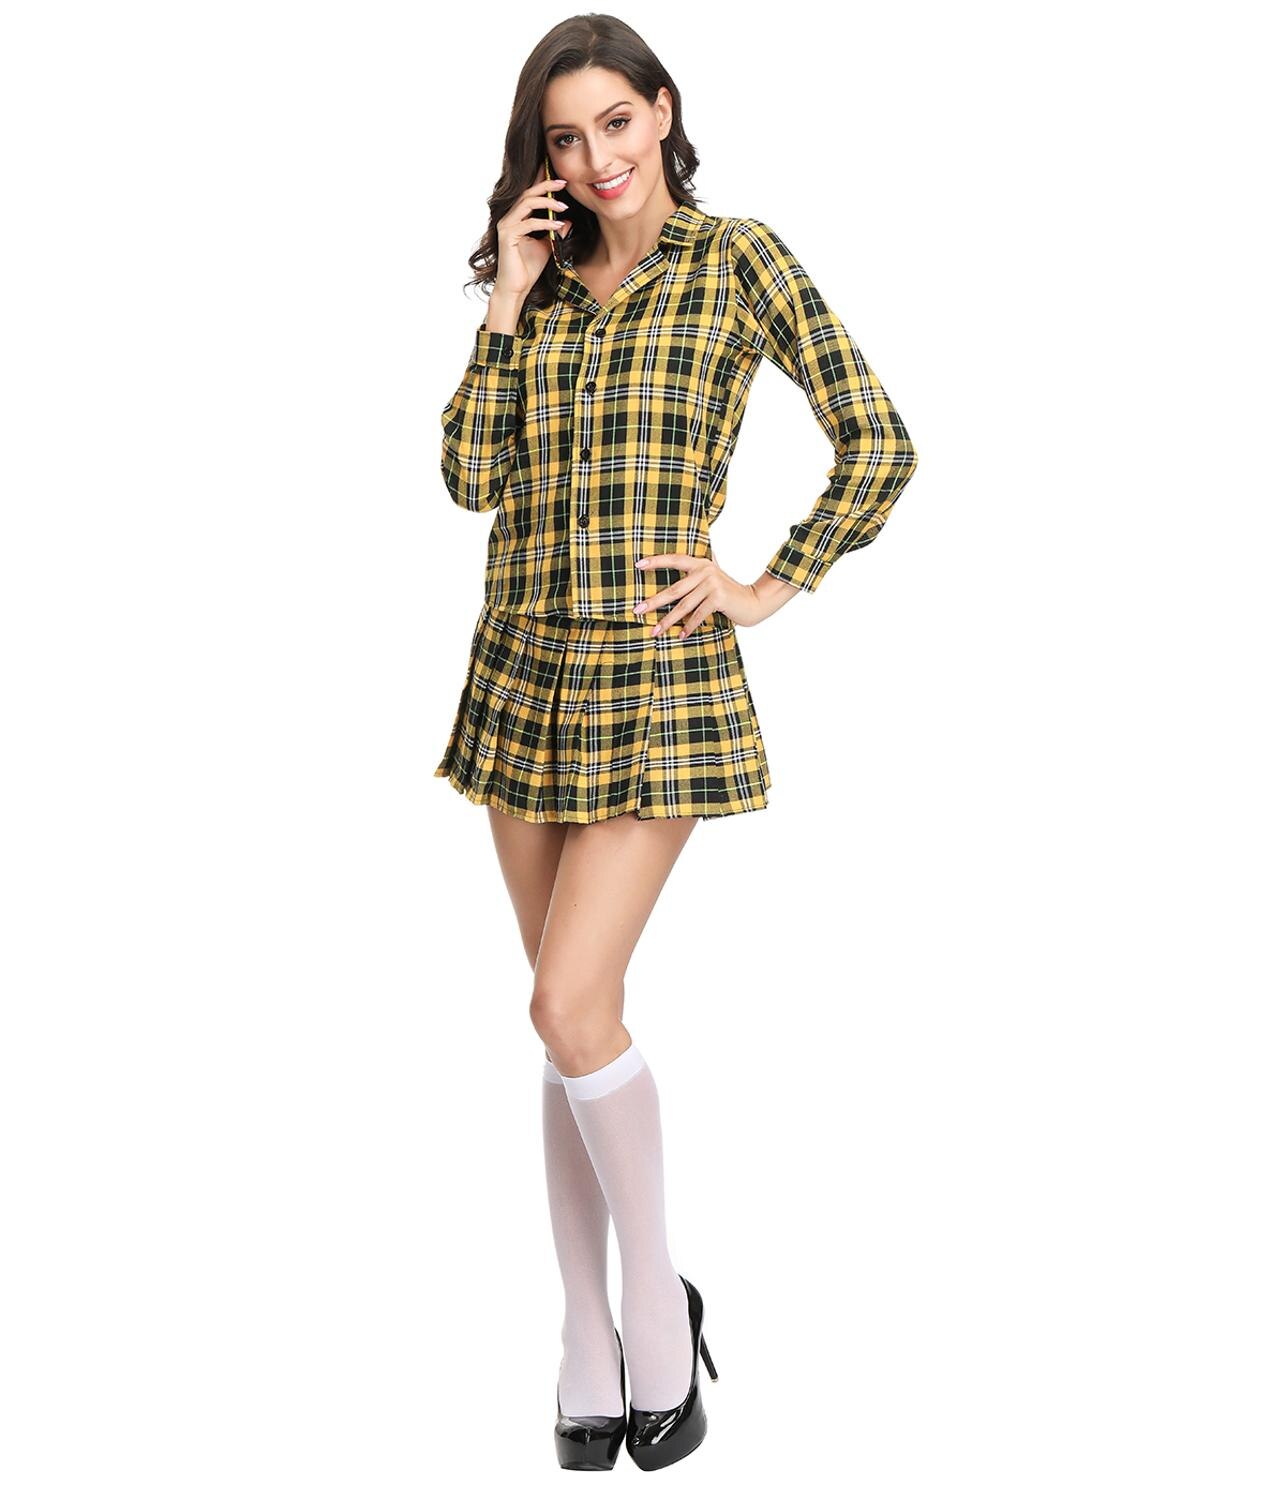 Plaid Skirt Cosplay School Girls Uniform Costume Women Sexy Long Sleeve Top Skirts Role Play Sexy Student Costumes